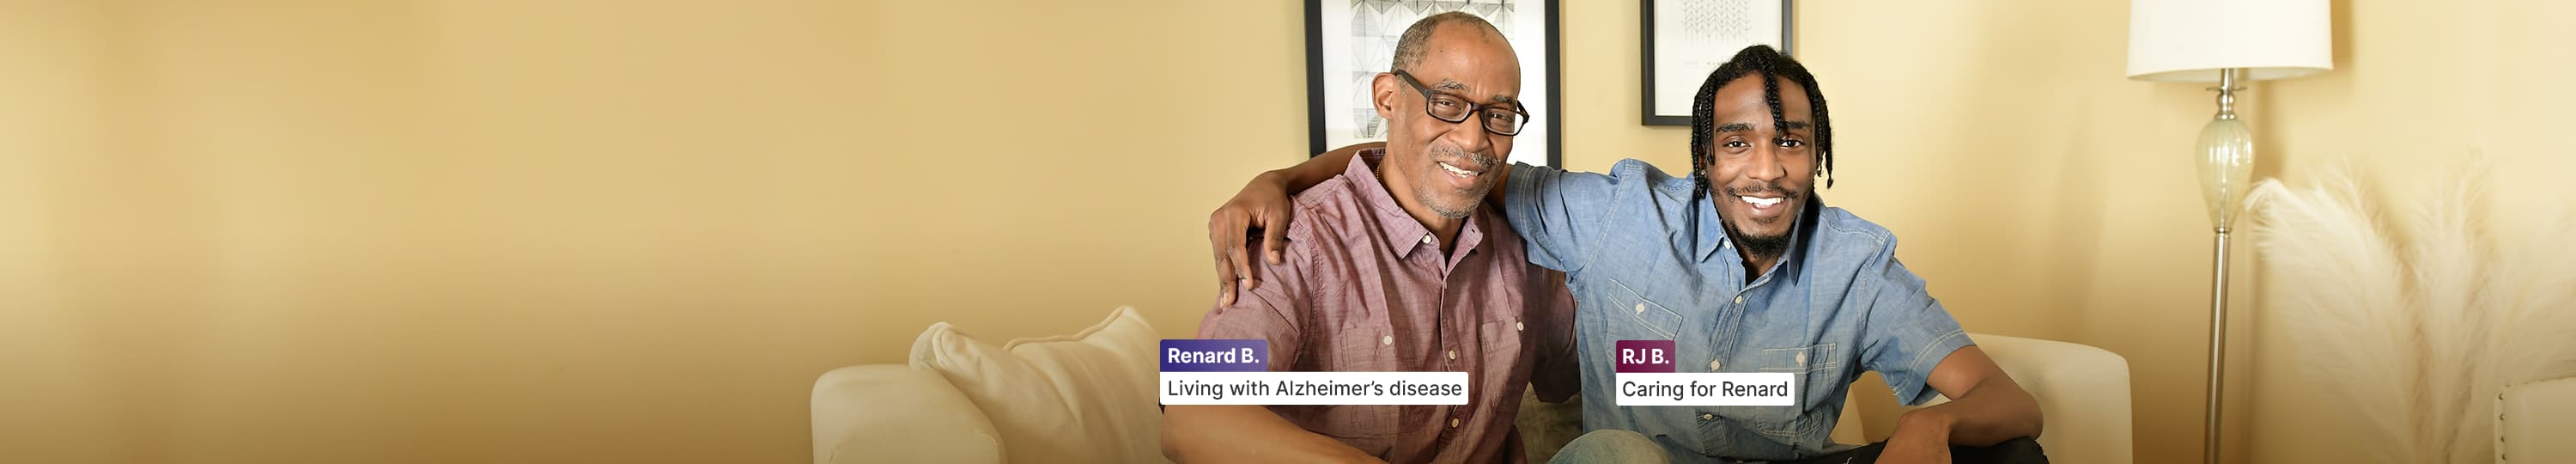 Renard, who is living with Alzheimer’s disease, arm in arm with RJ, his care partner on a sofa